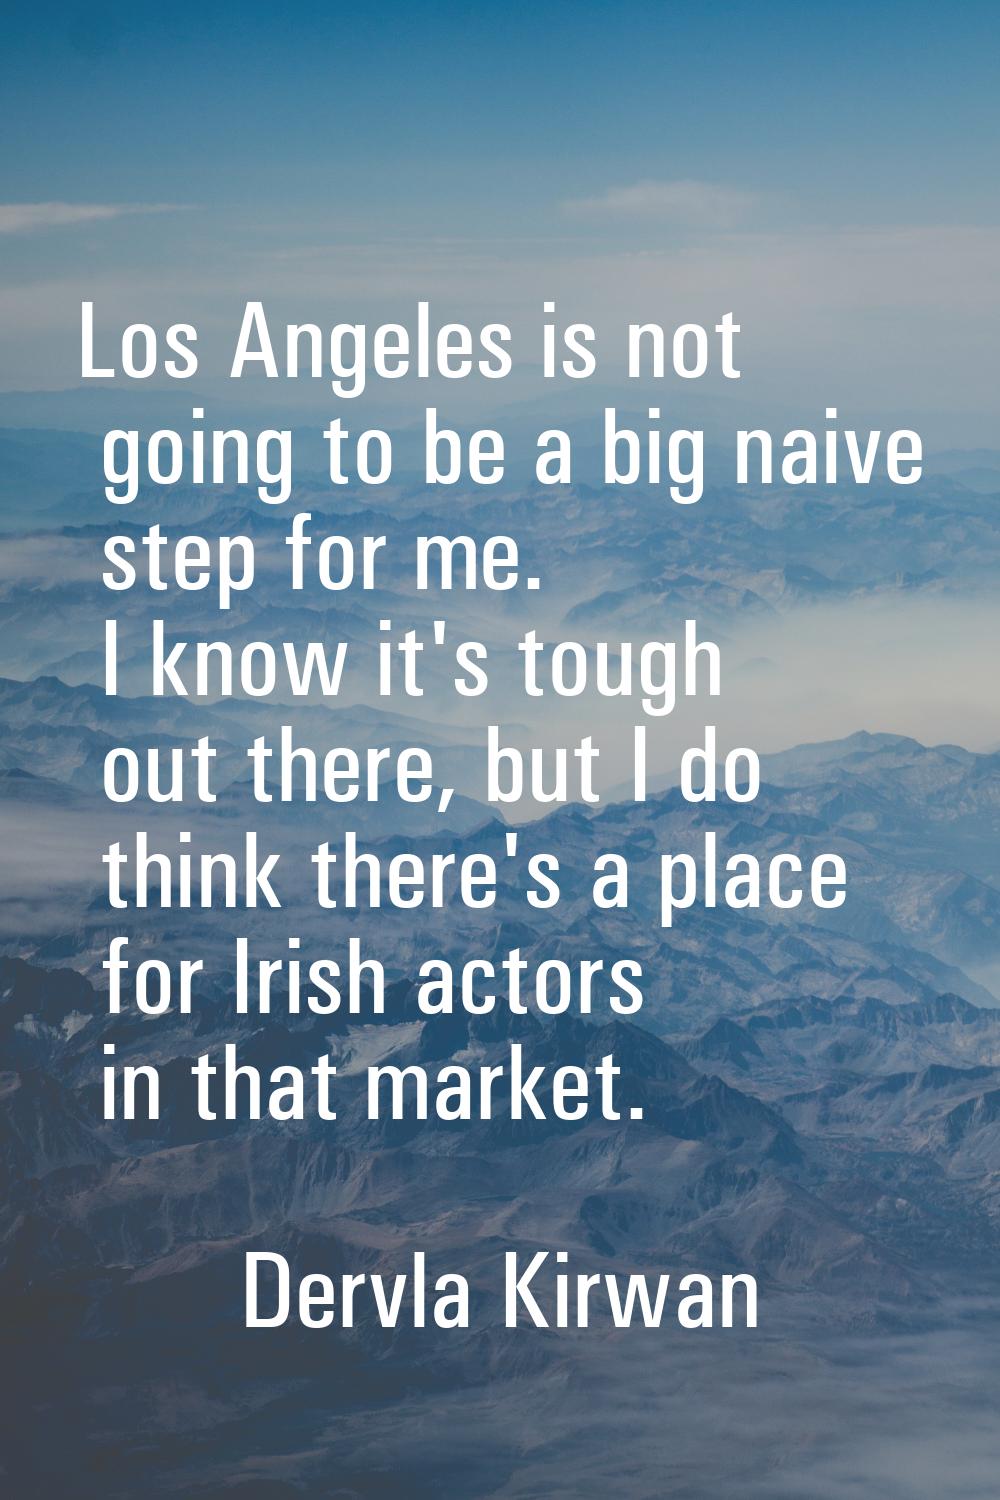 Los Angeles is not going to be a big naive step for me. I know it's tough out there, but I do think